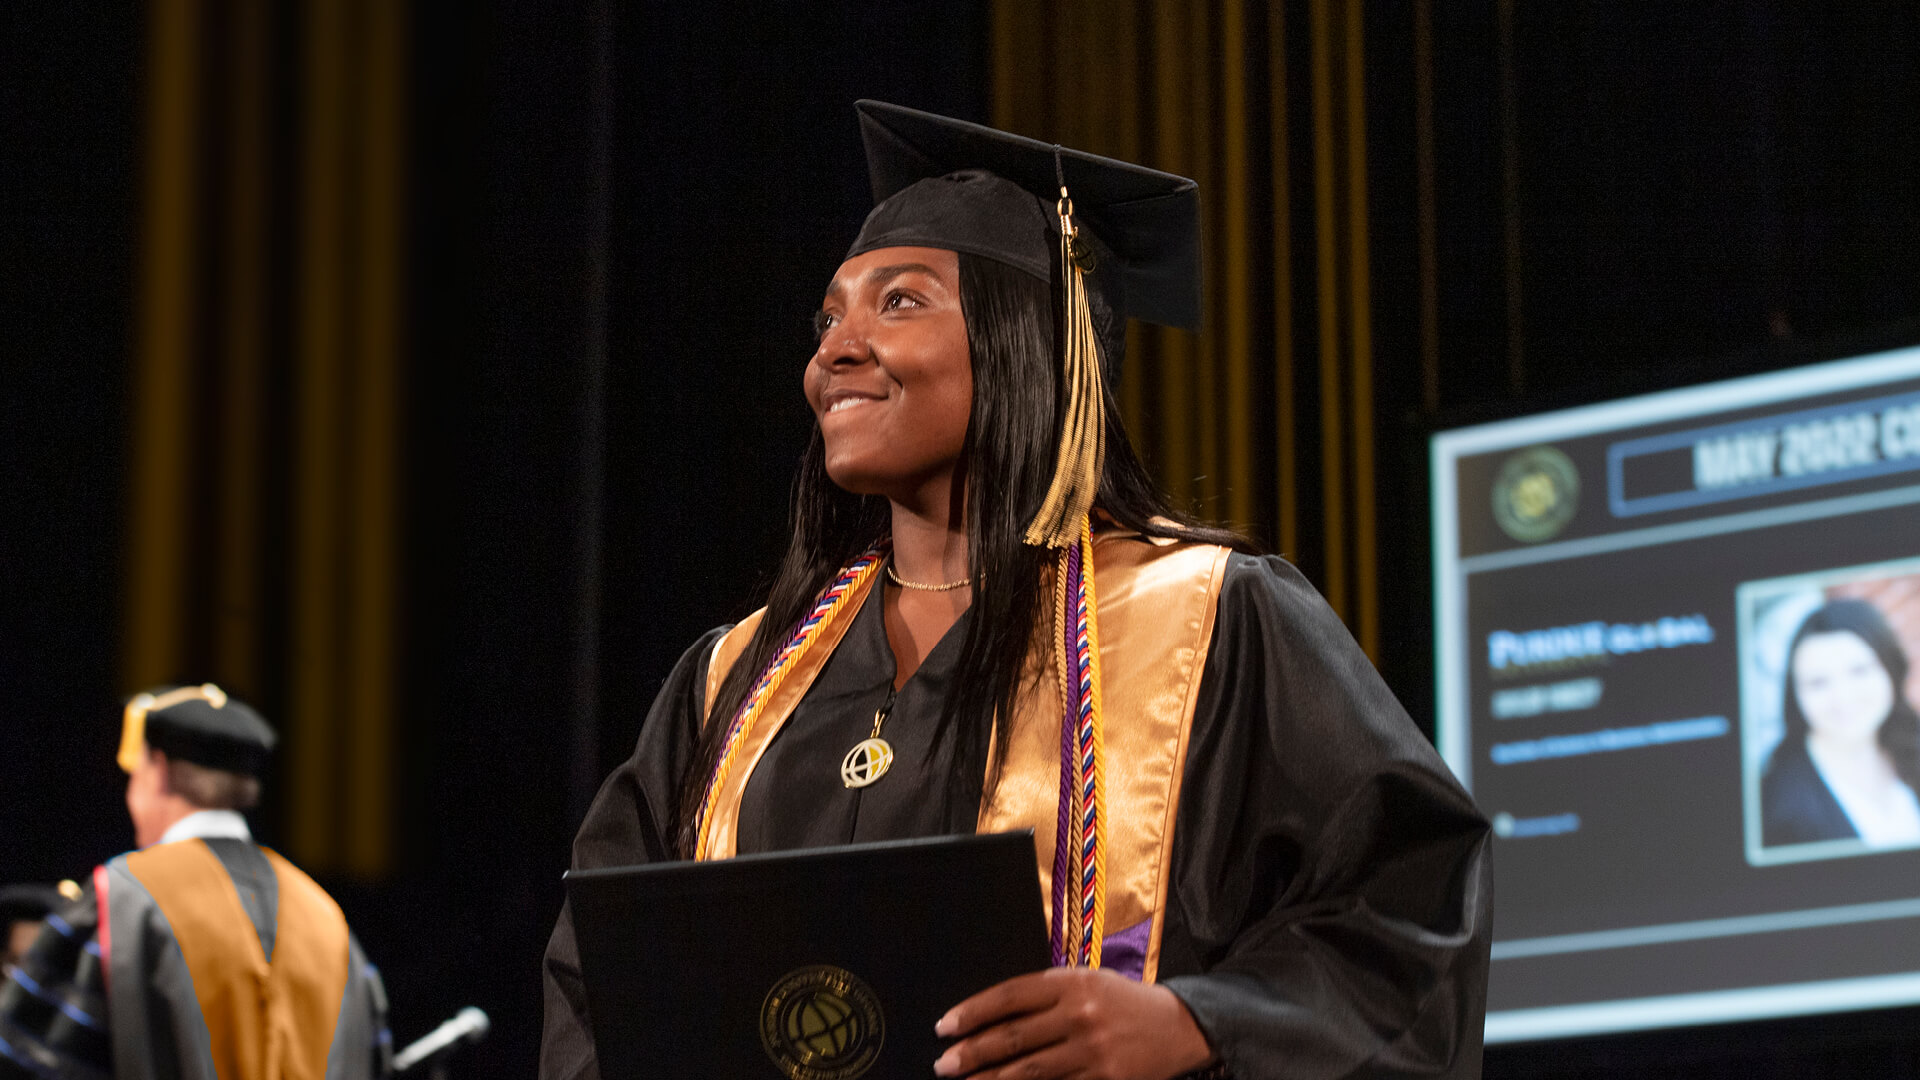 A Purdue Global graduate at the 2022 spring commencement ceremony in Indianapolis.